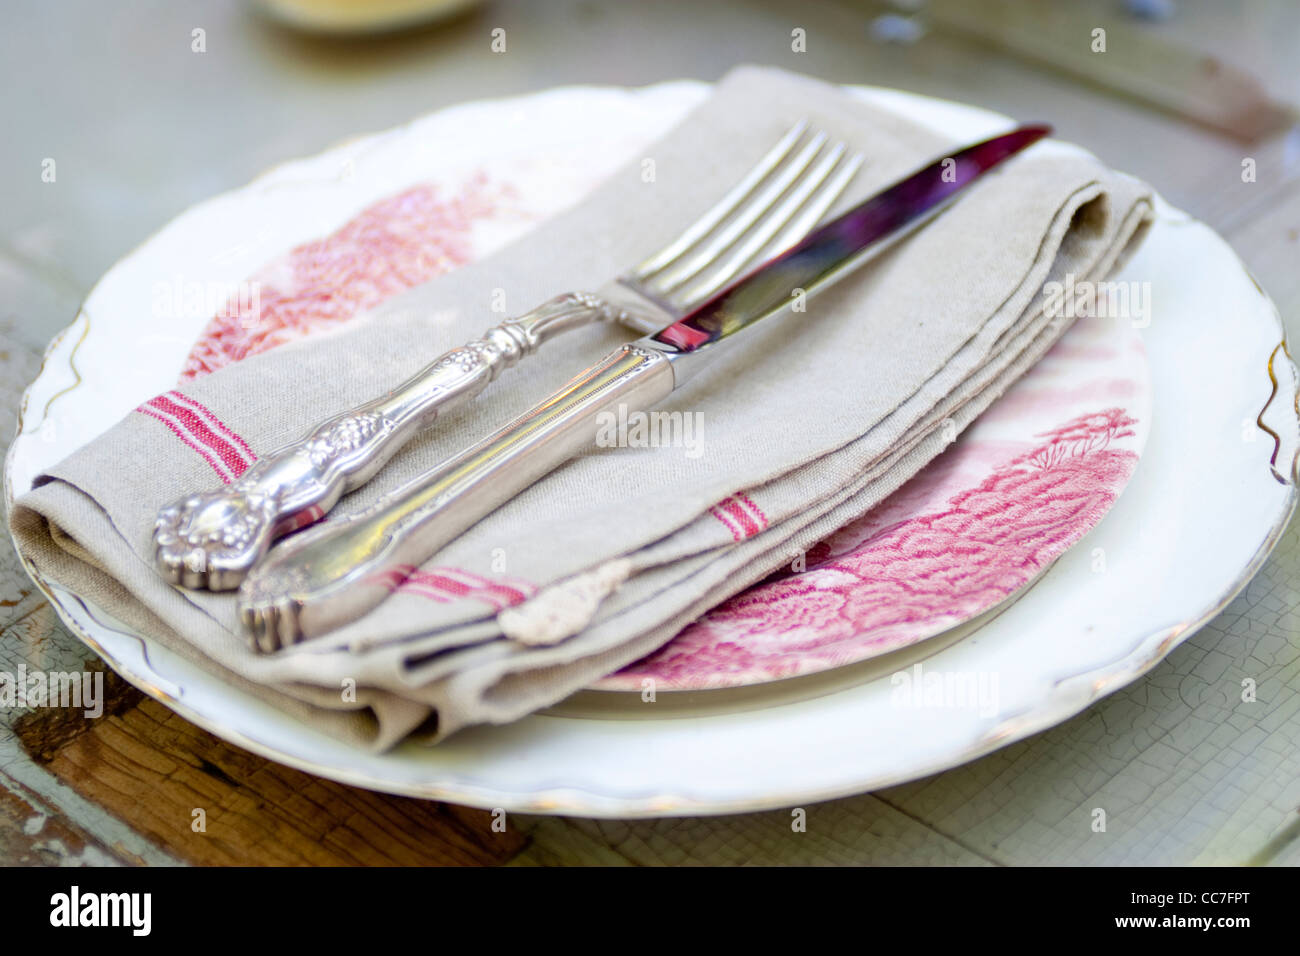 Silverware and napkin on plate Stock Photo